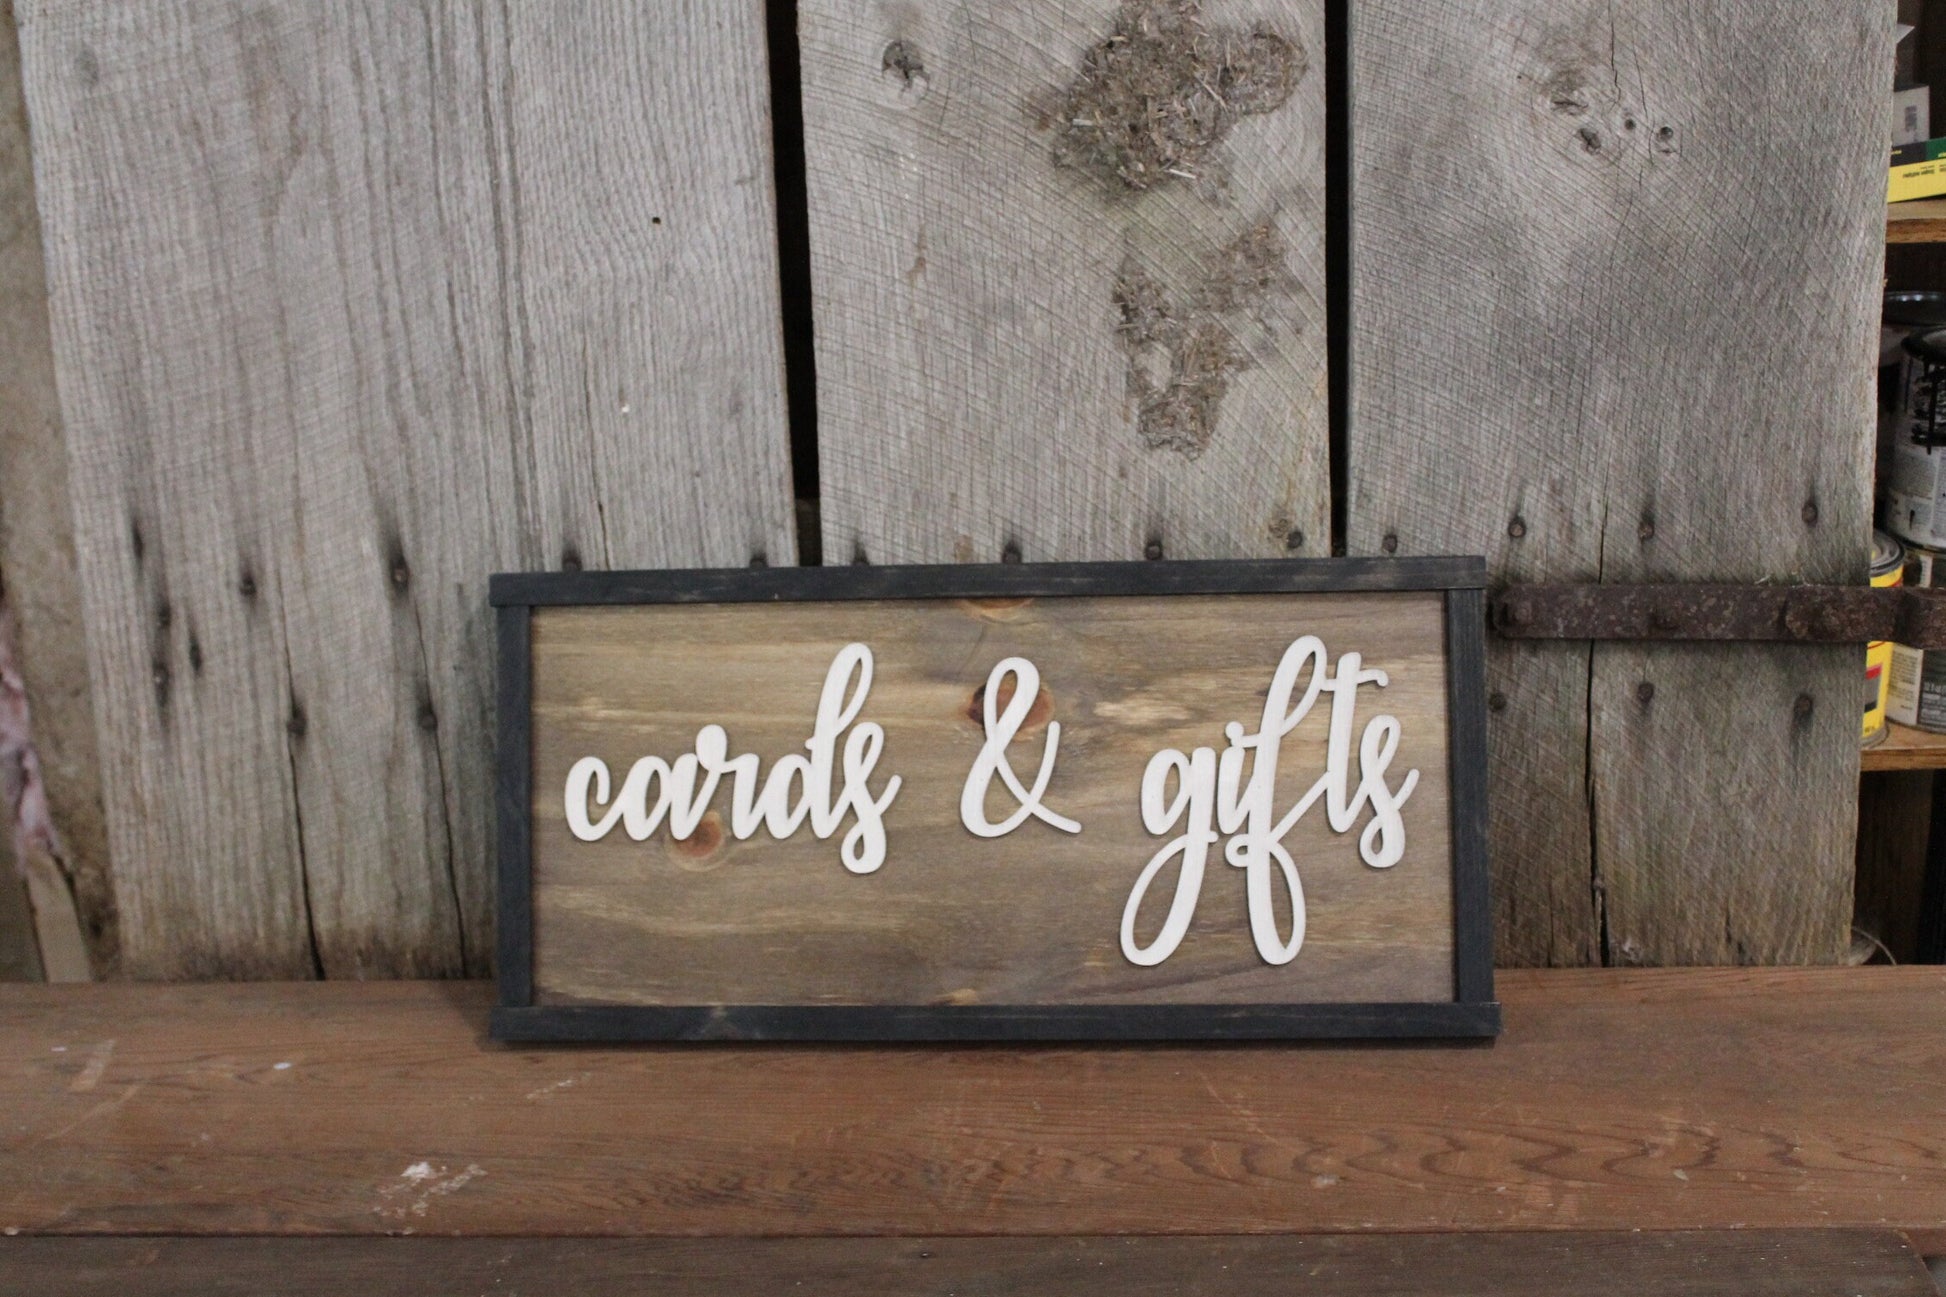 Cards & Gifts Sign Raised Text Wedding Party Graduation Party Shower Extra Large Framed Rustic Primitive Barn Wood Country Signage